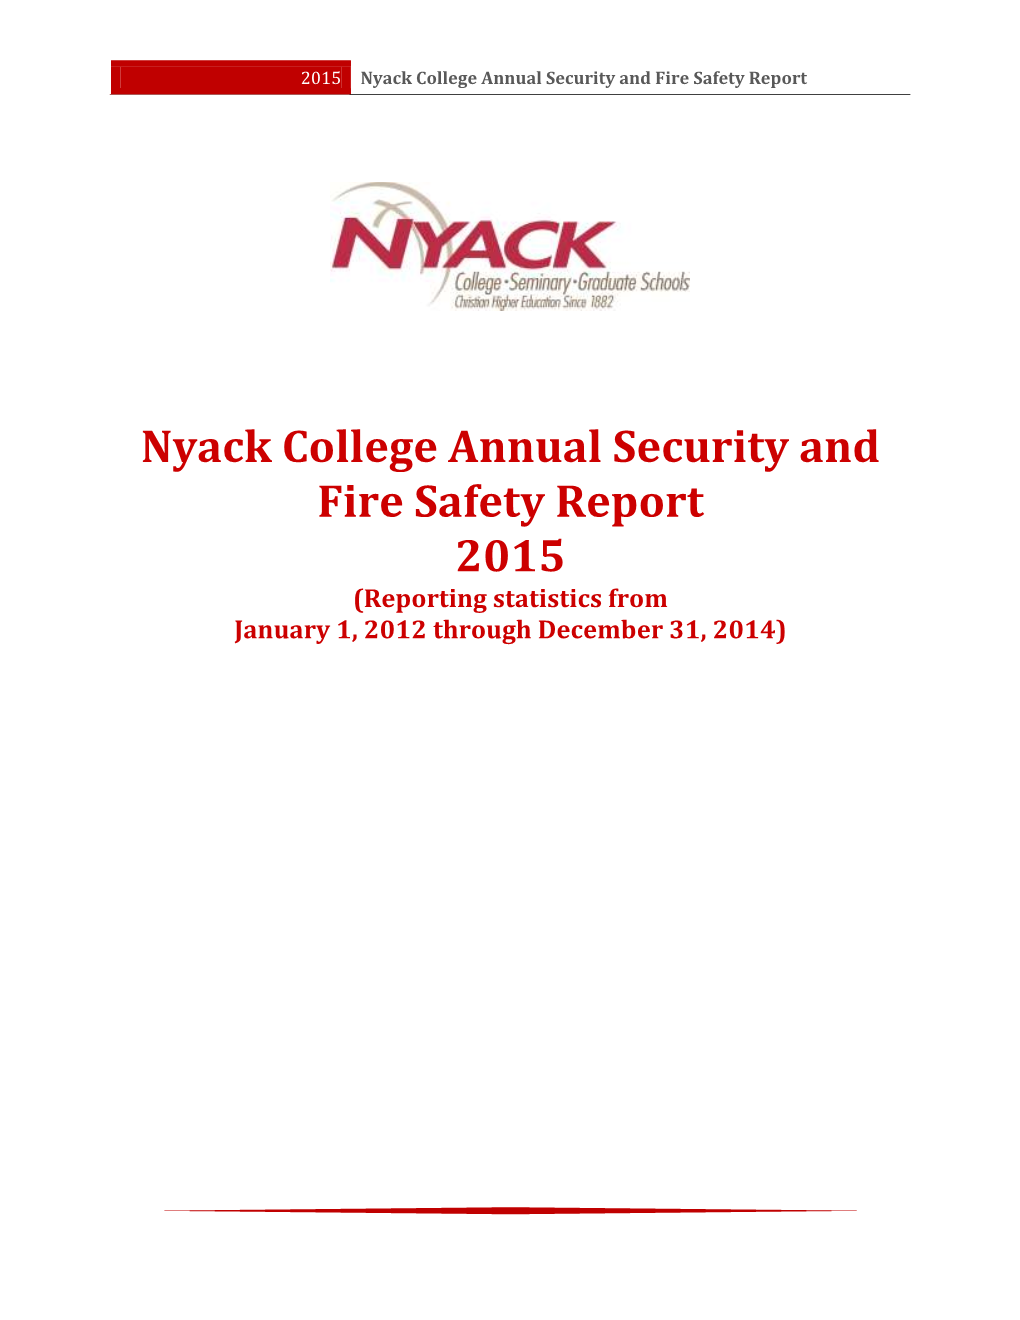 Nyack College Annual Security and Fire Safety Report 2015 (Reporting Statistics from January 1, 2012 Through December 31, 2014)